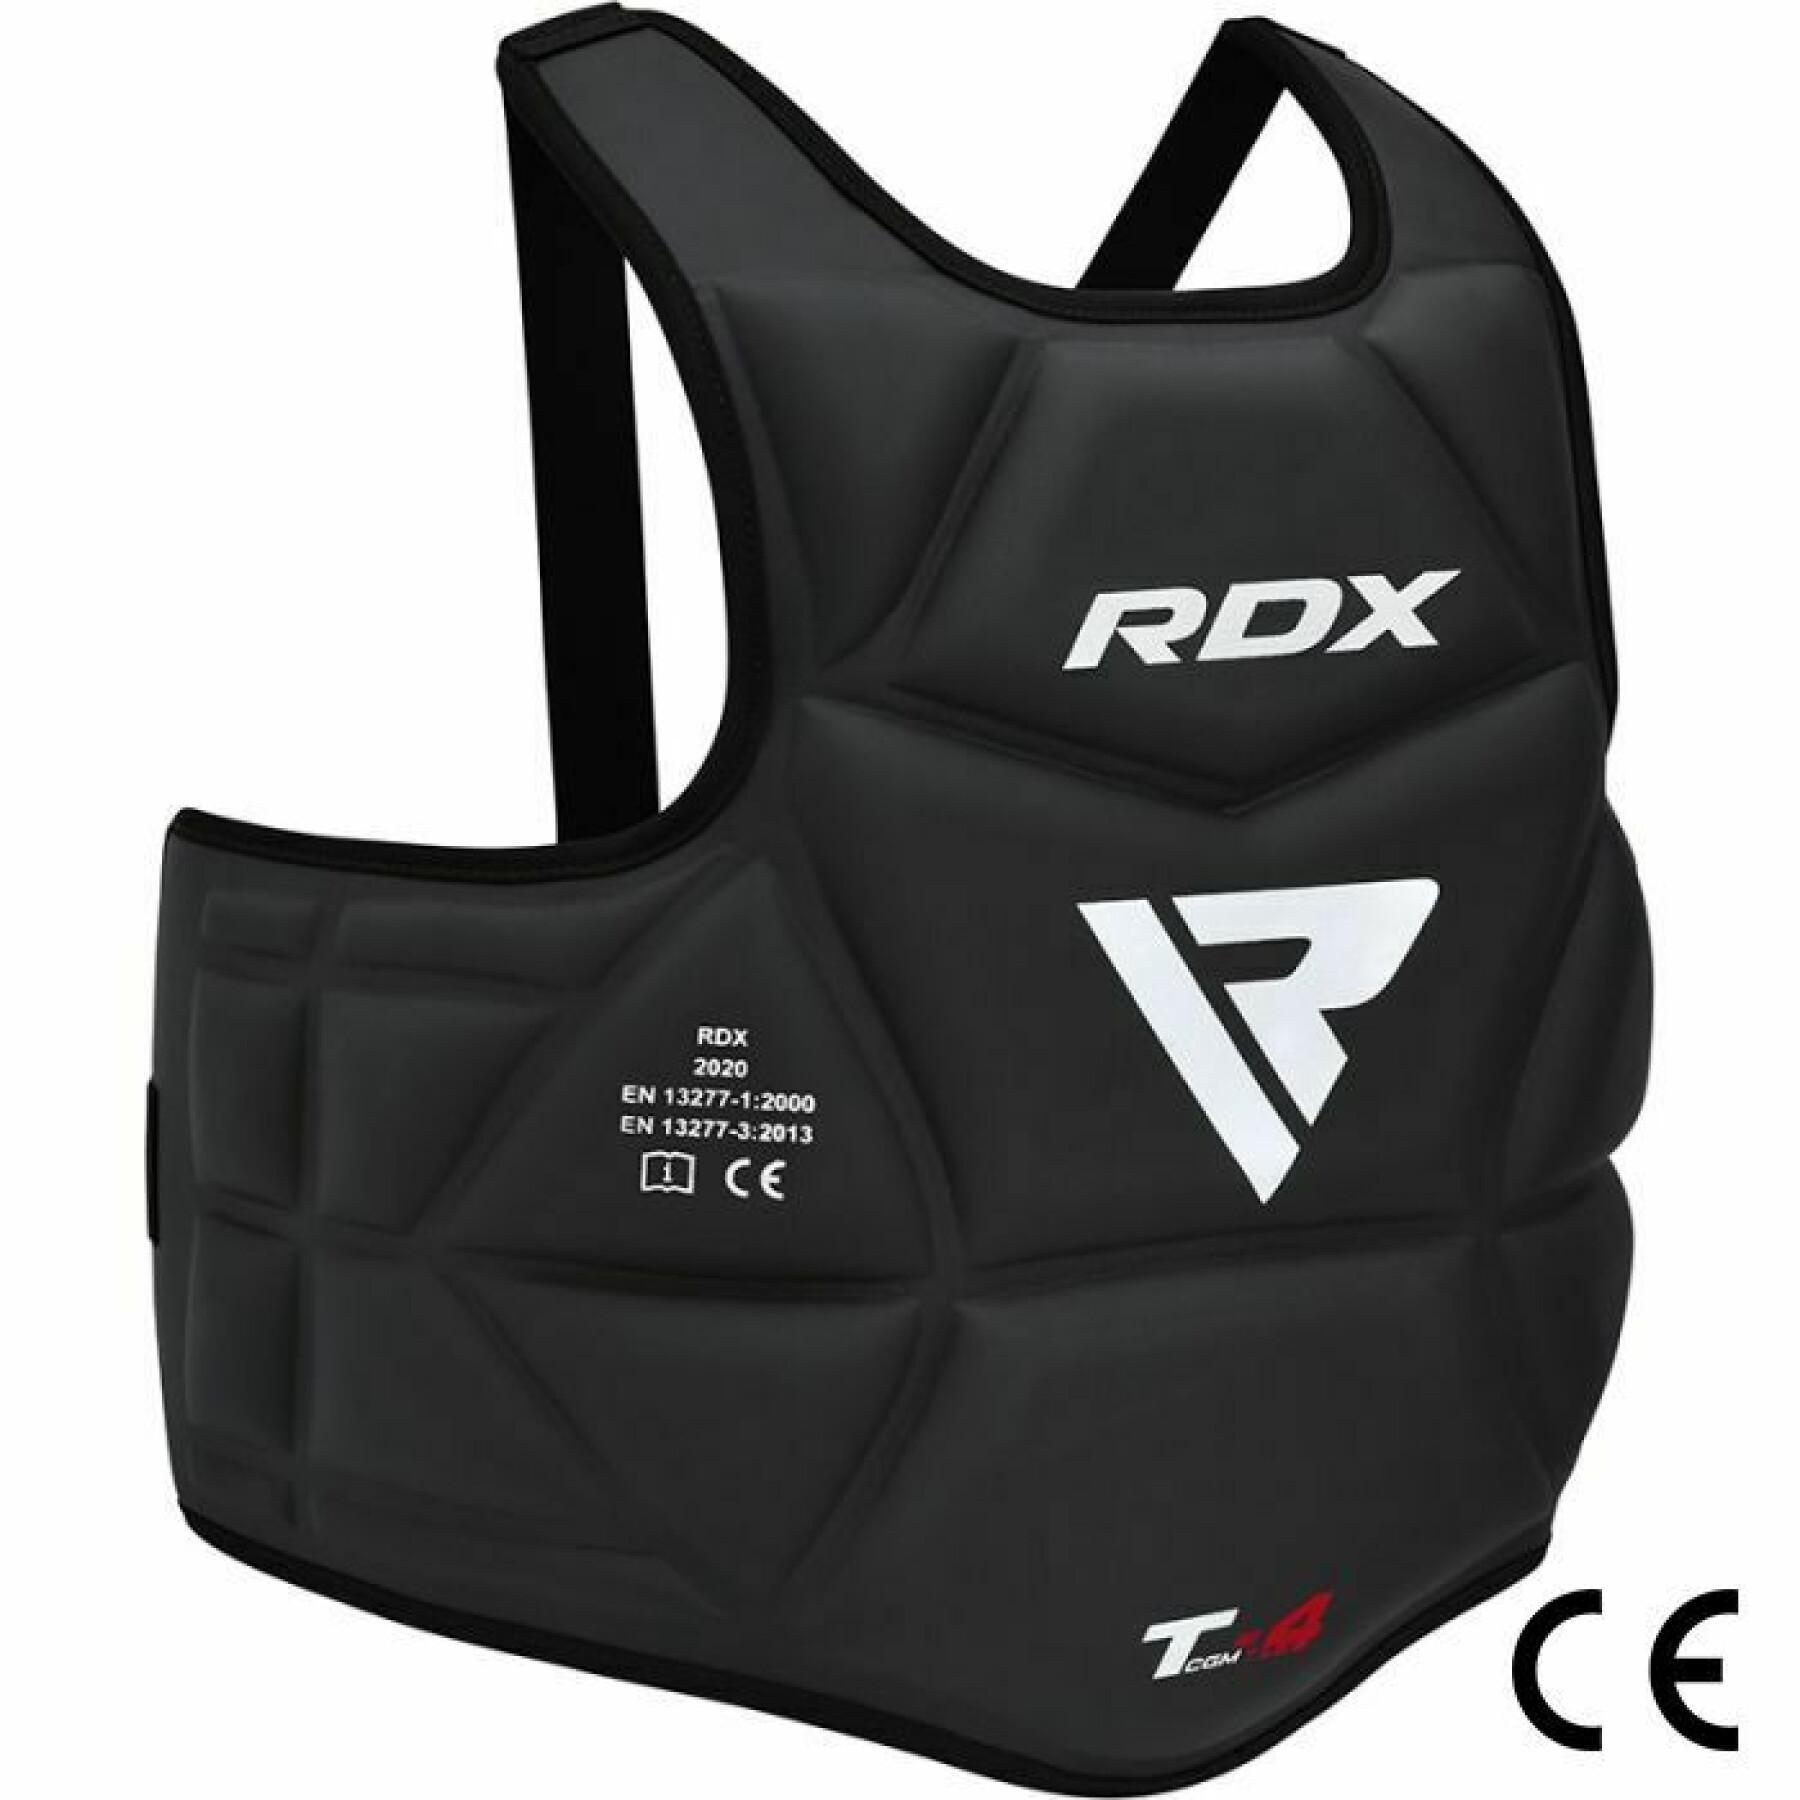 Boxing chest protector RDX